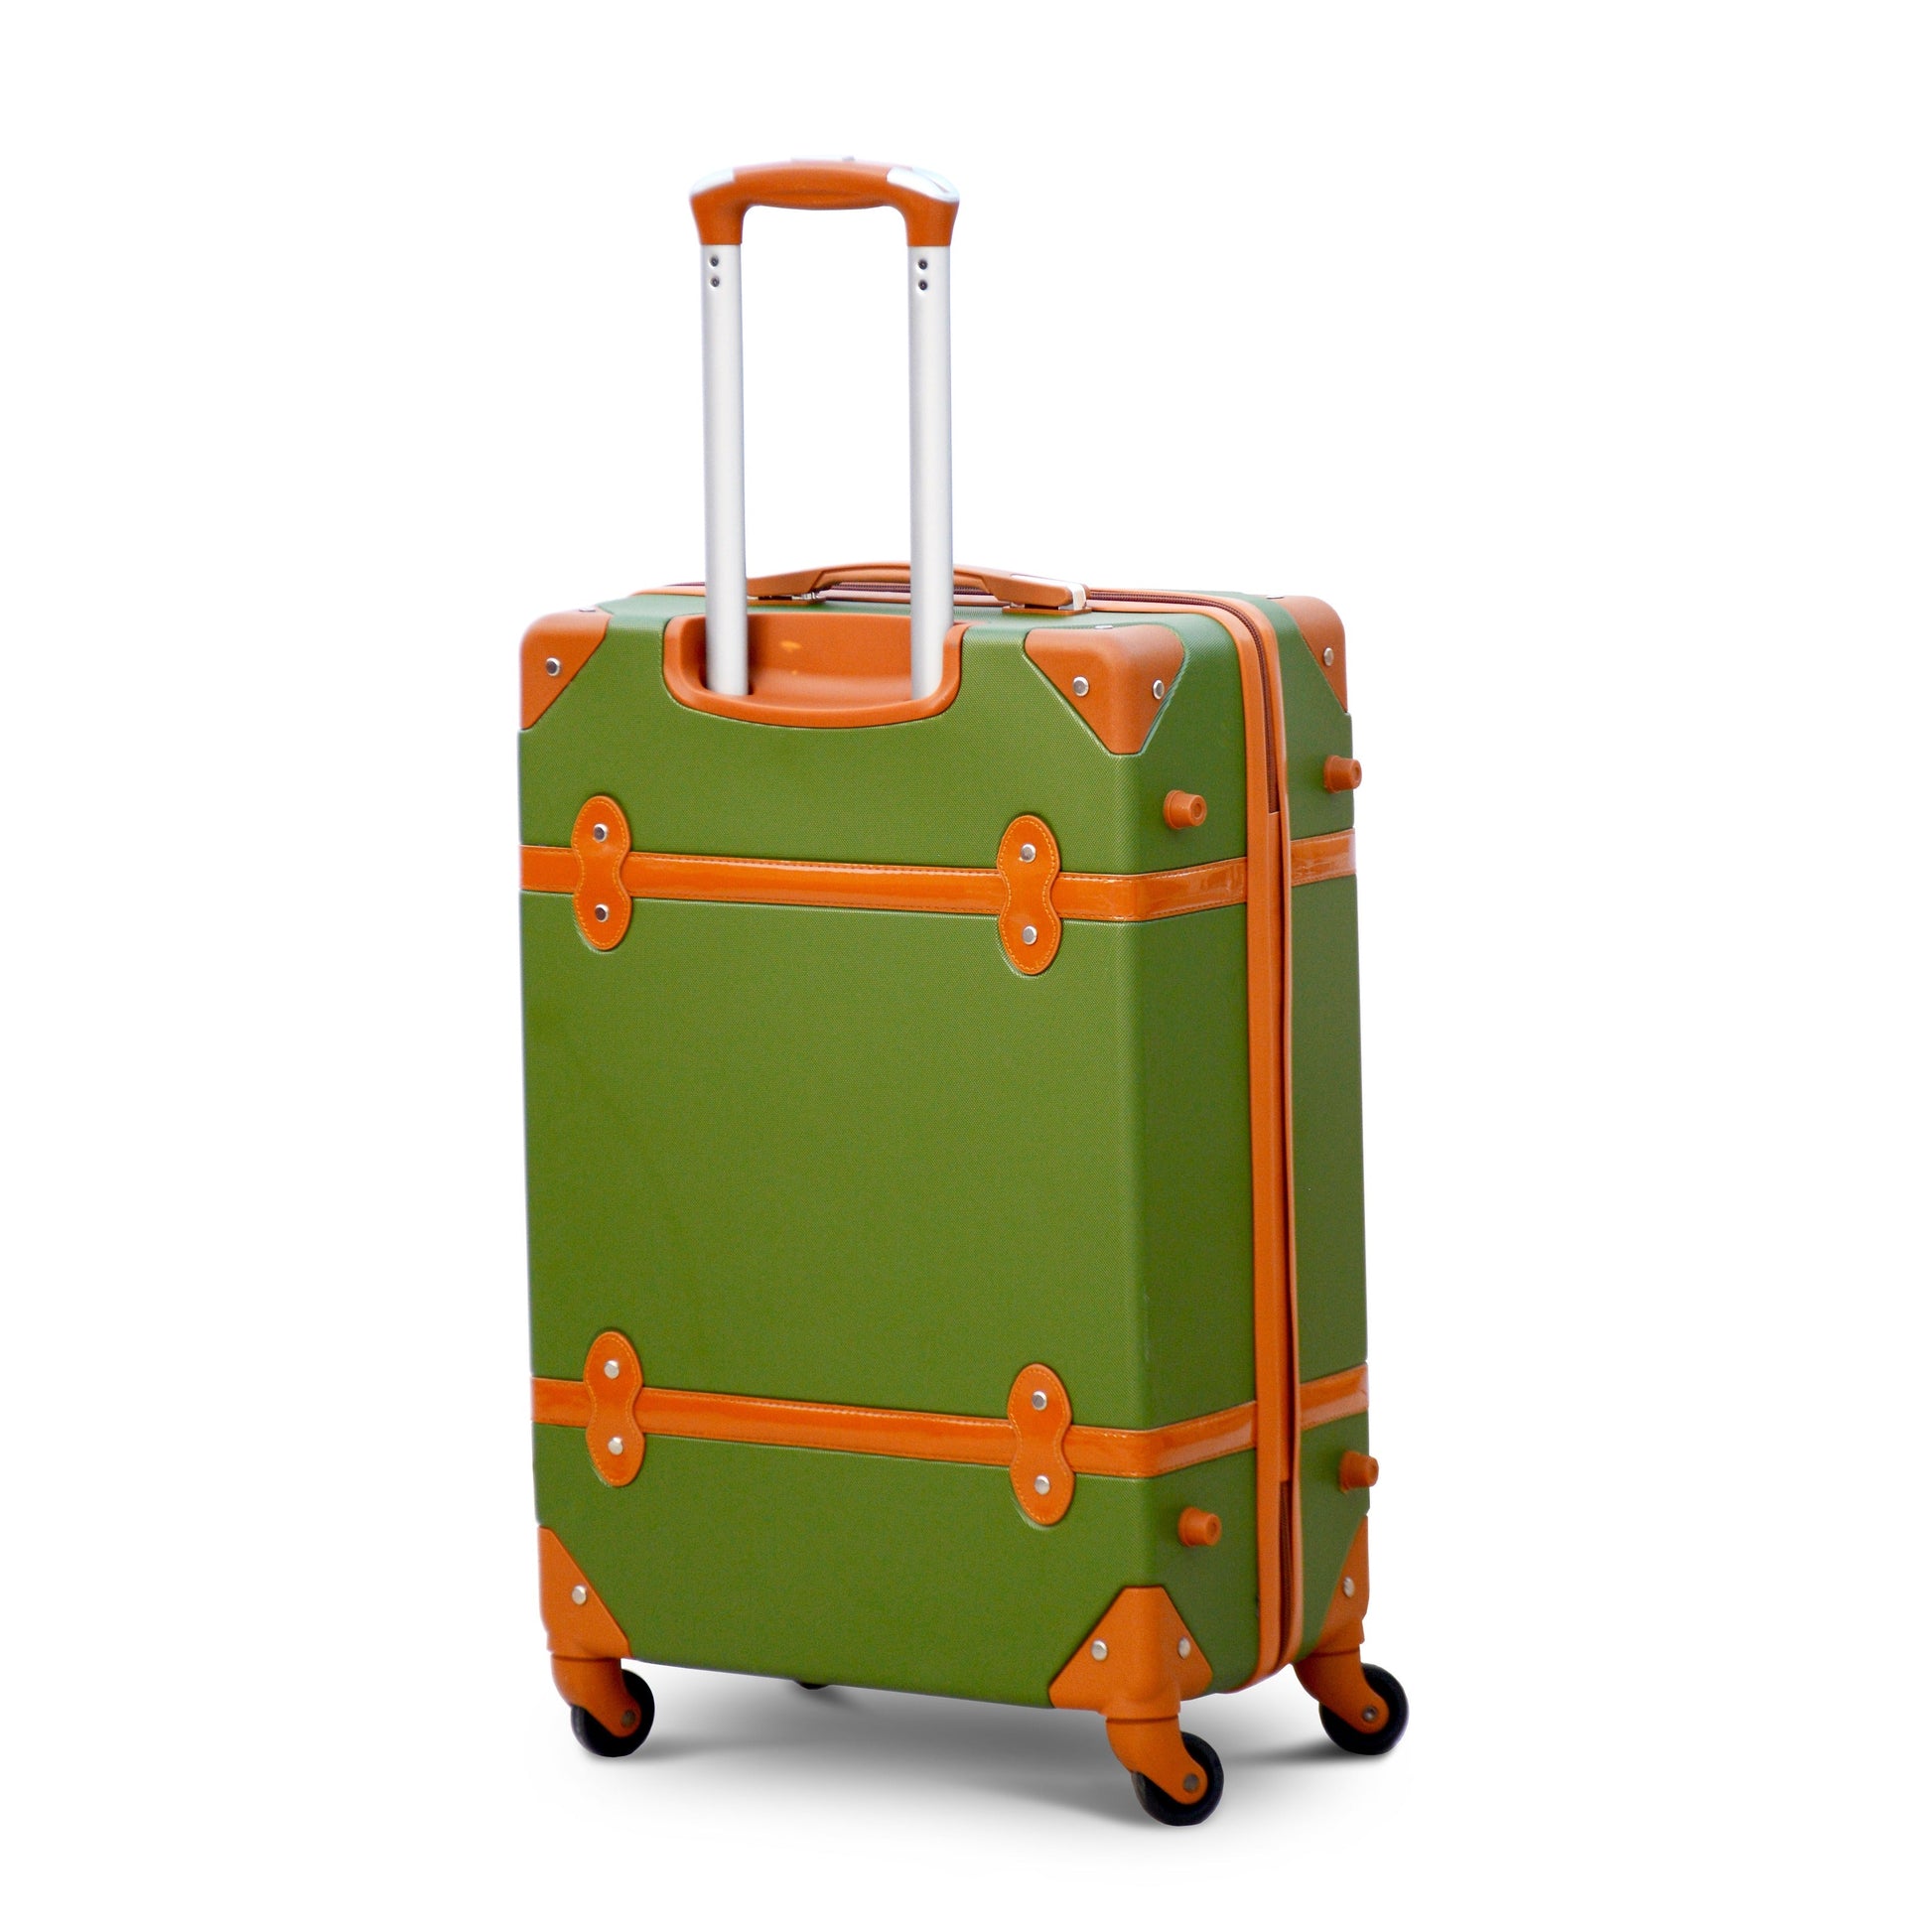 lightweight spinner wheel green luggage corner guard luggage 28 inch with number lock system